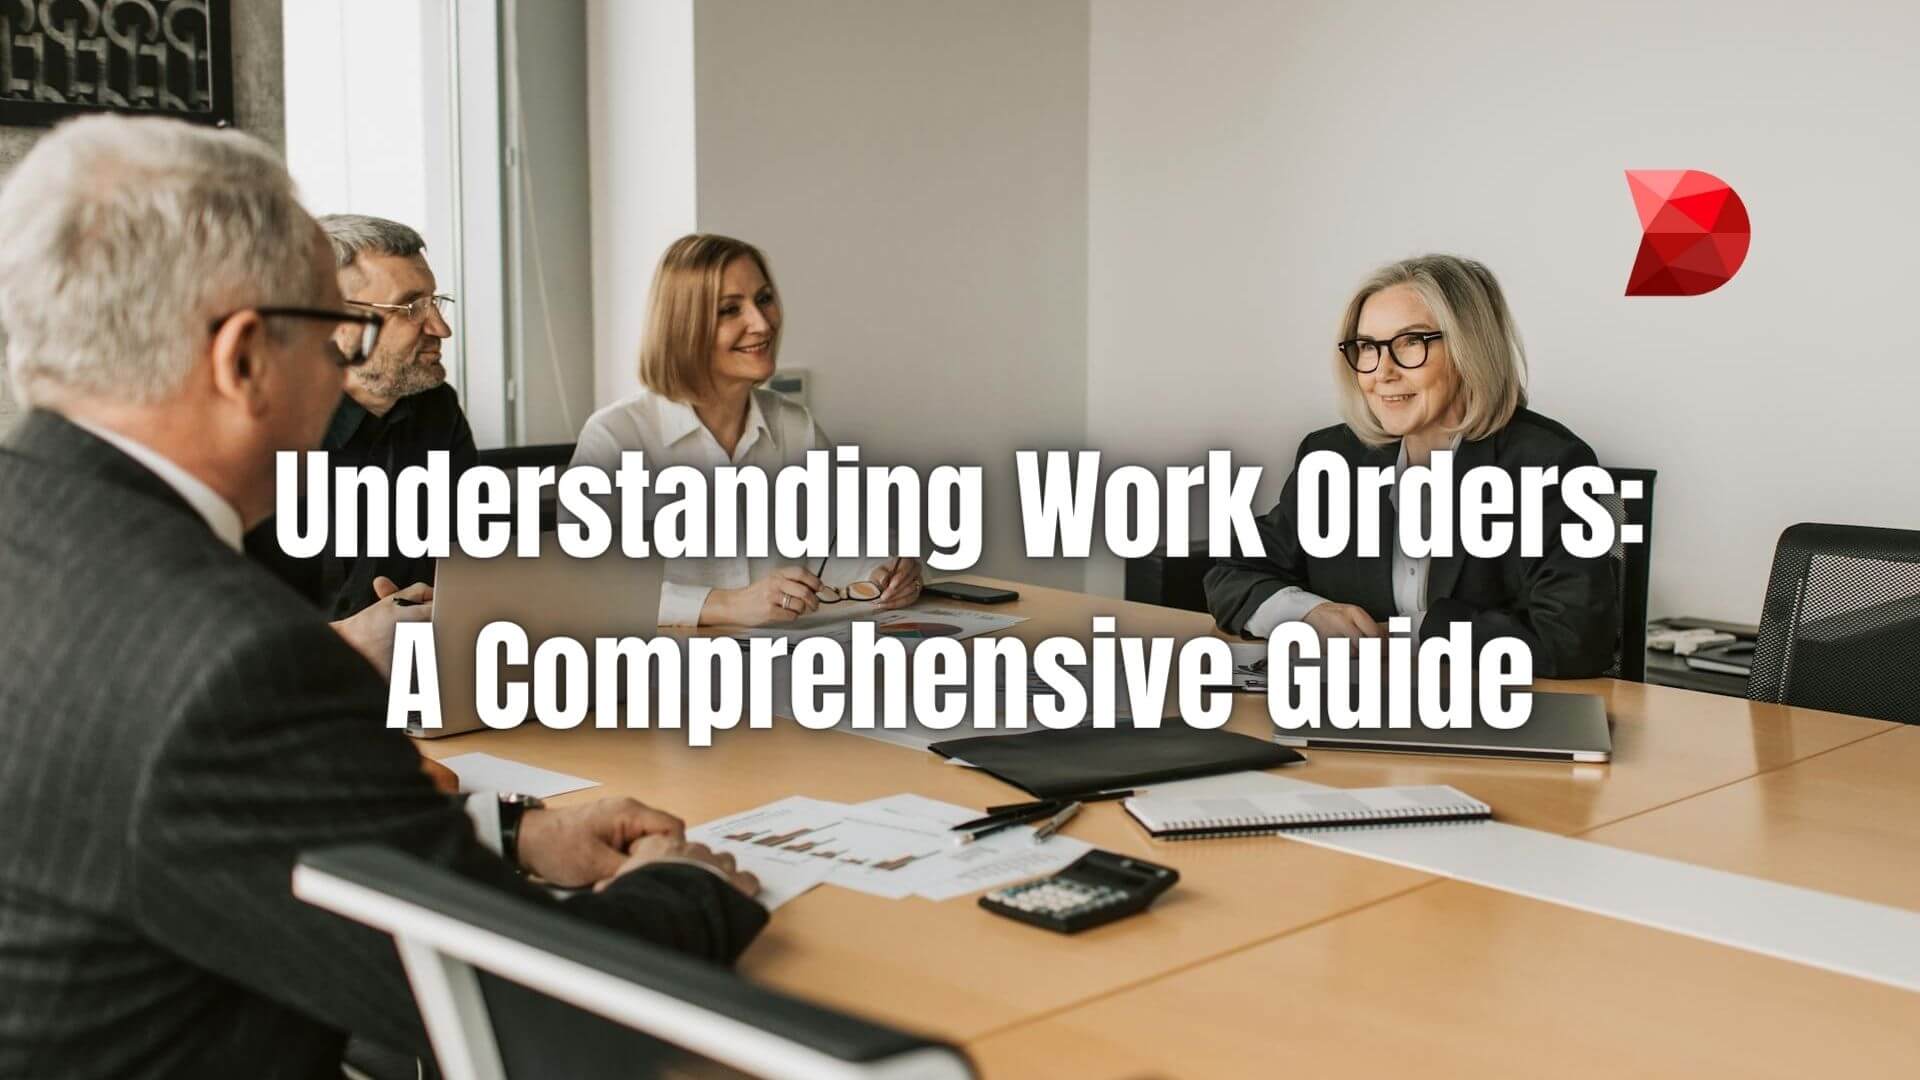 Unlock the complexities of work orders with our guide. Click here to learn everything from creation to completion in simple steps.